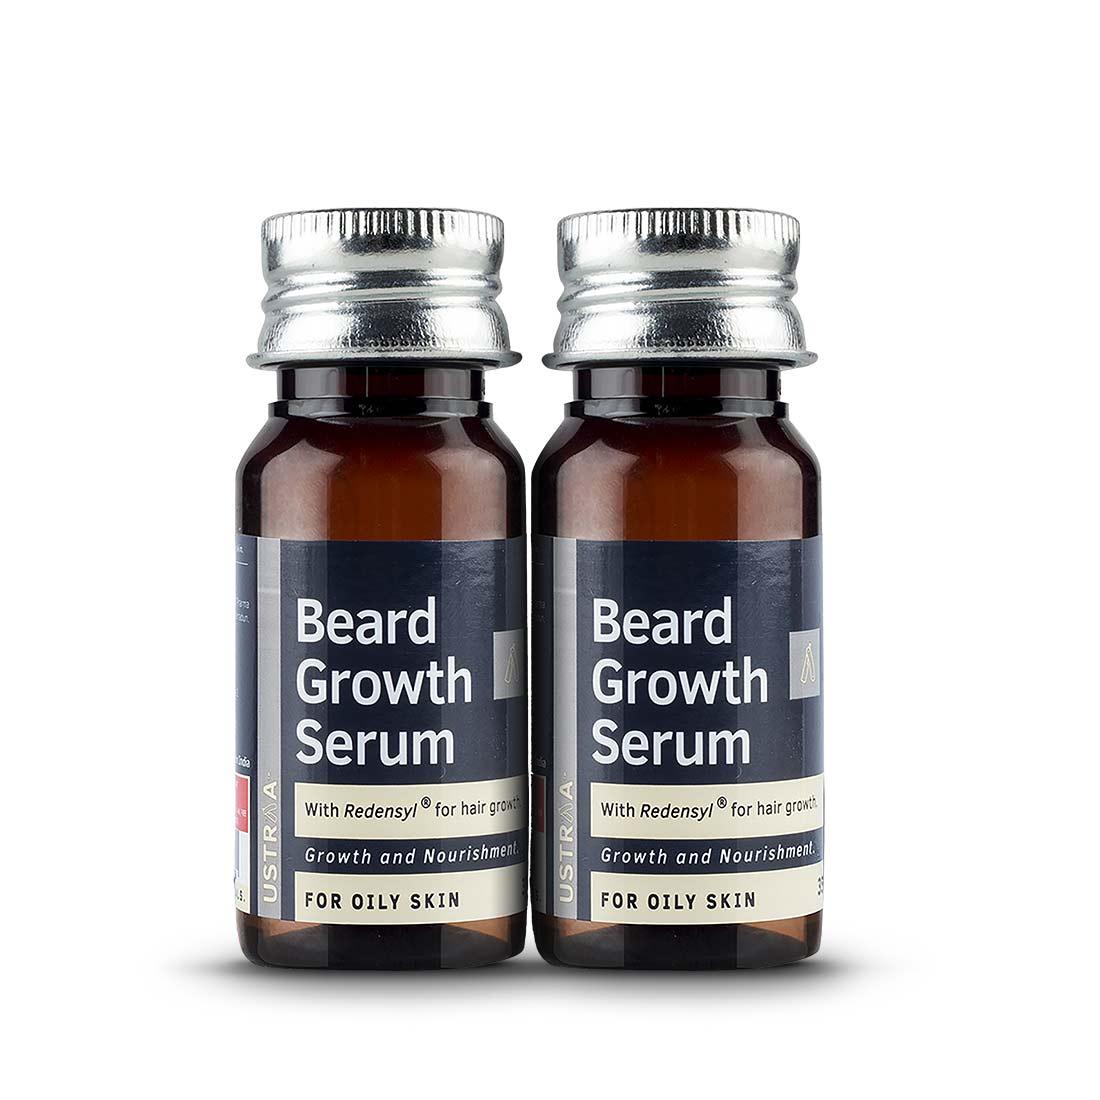 Ustraa Beard Growth Serum - Set of 2 - Promotes Beard growth in Oily Skin made with the patented Redensyl dealing with patchy Beard